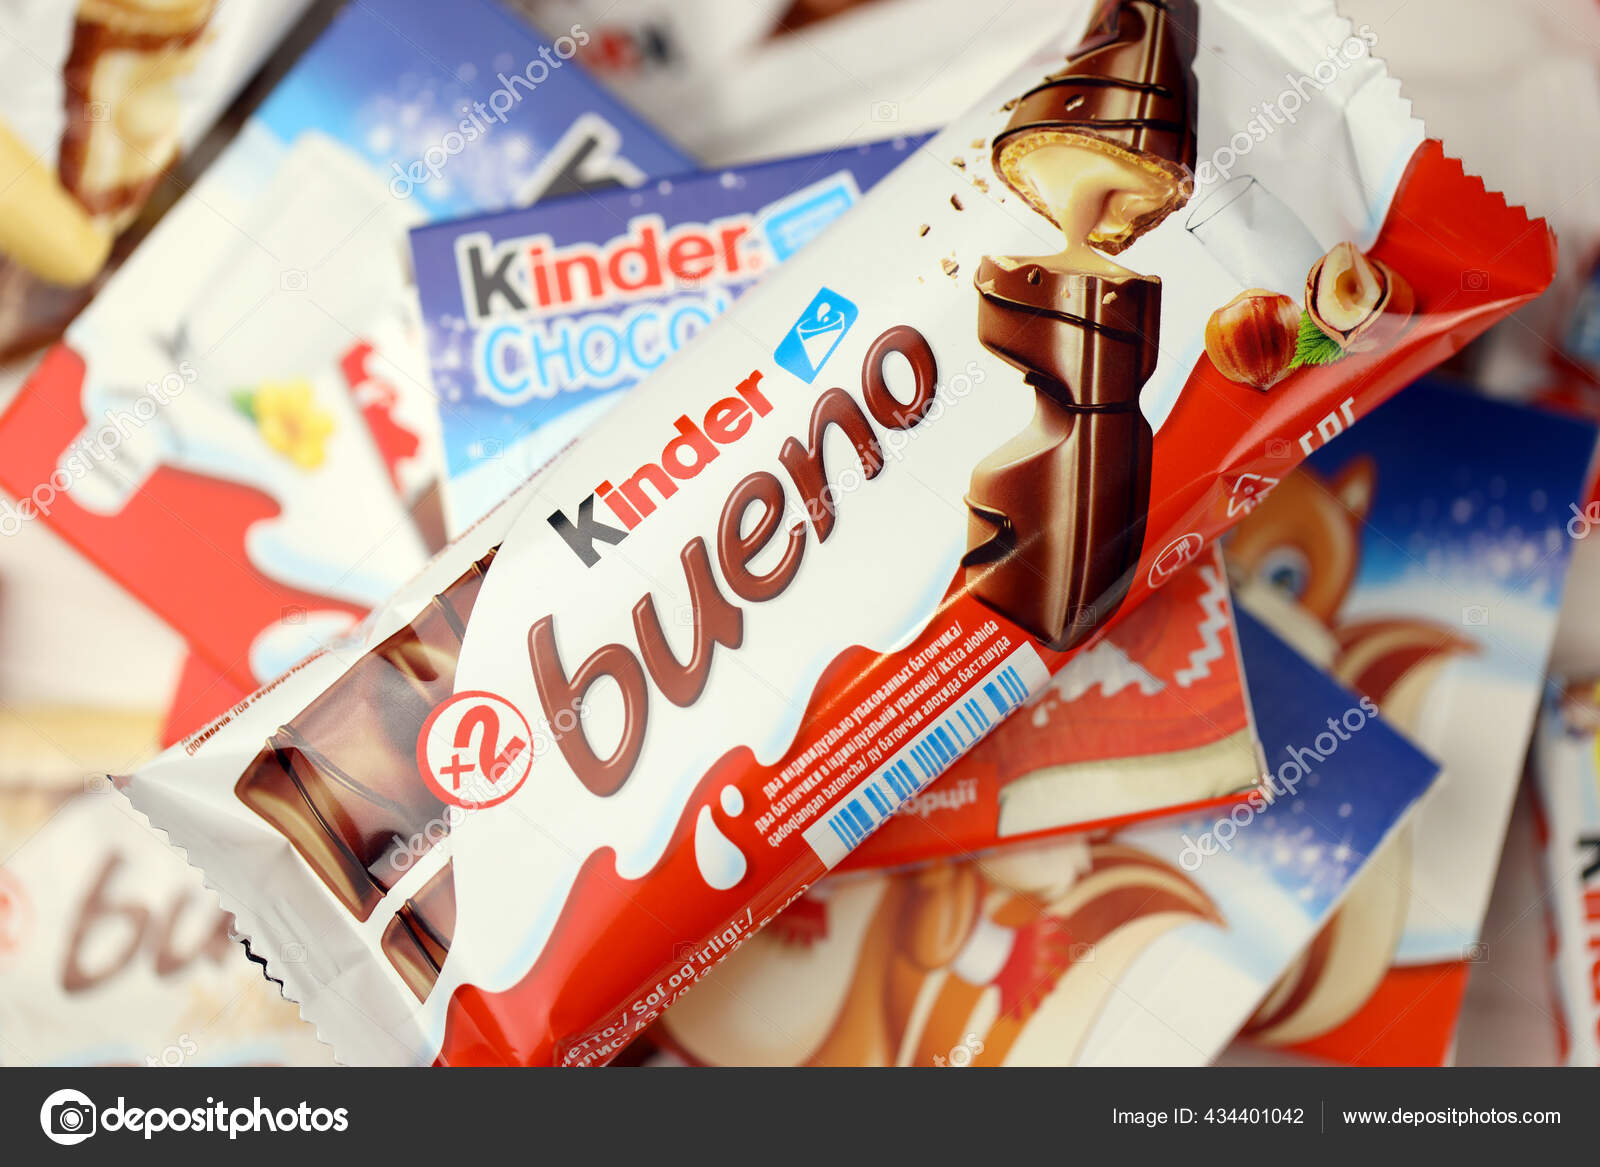 Box of Kinder Cards Cookies Made by Kinder Brand Editorial Stock